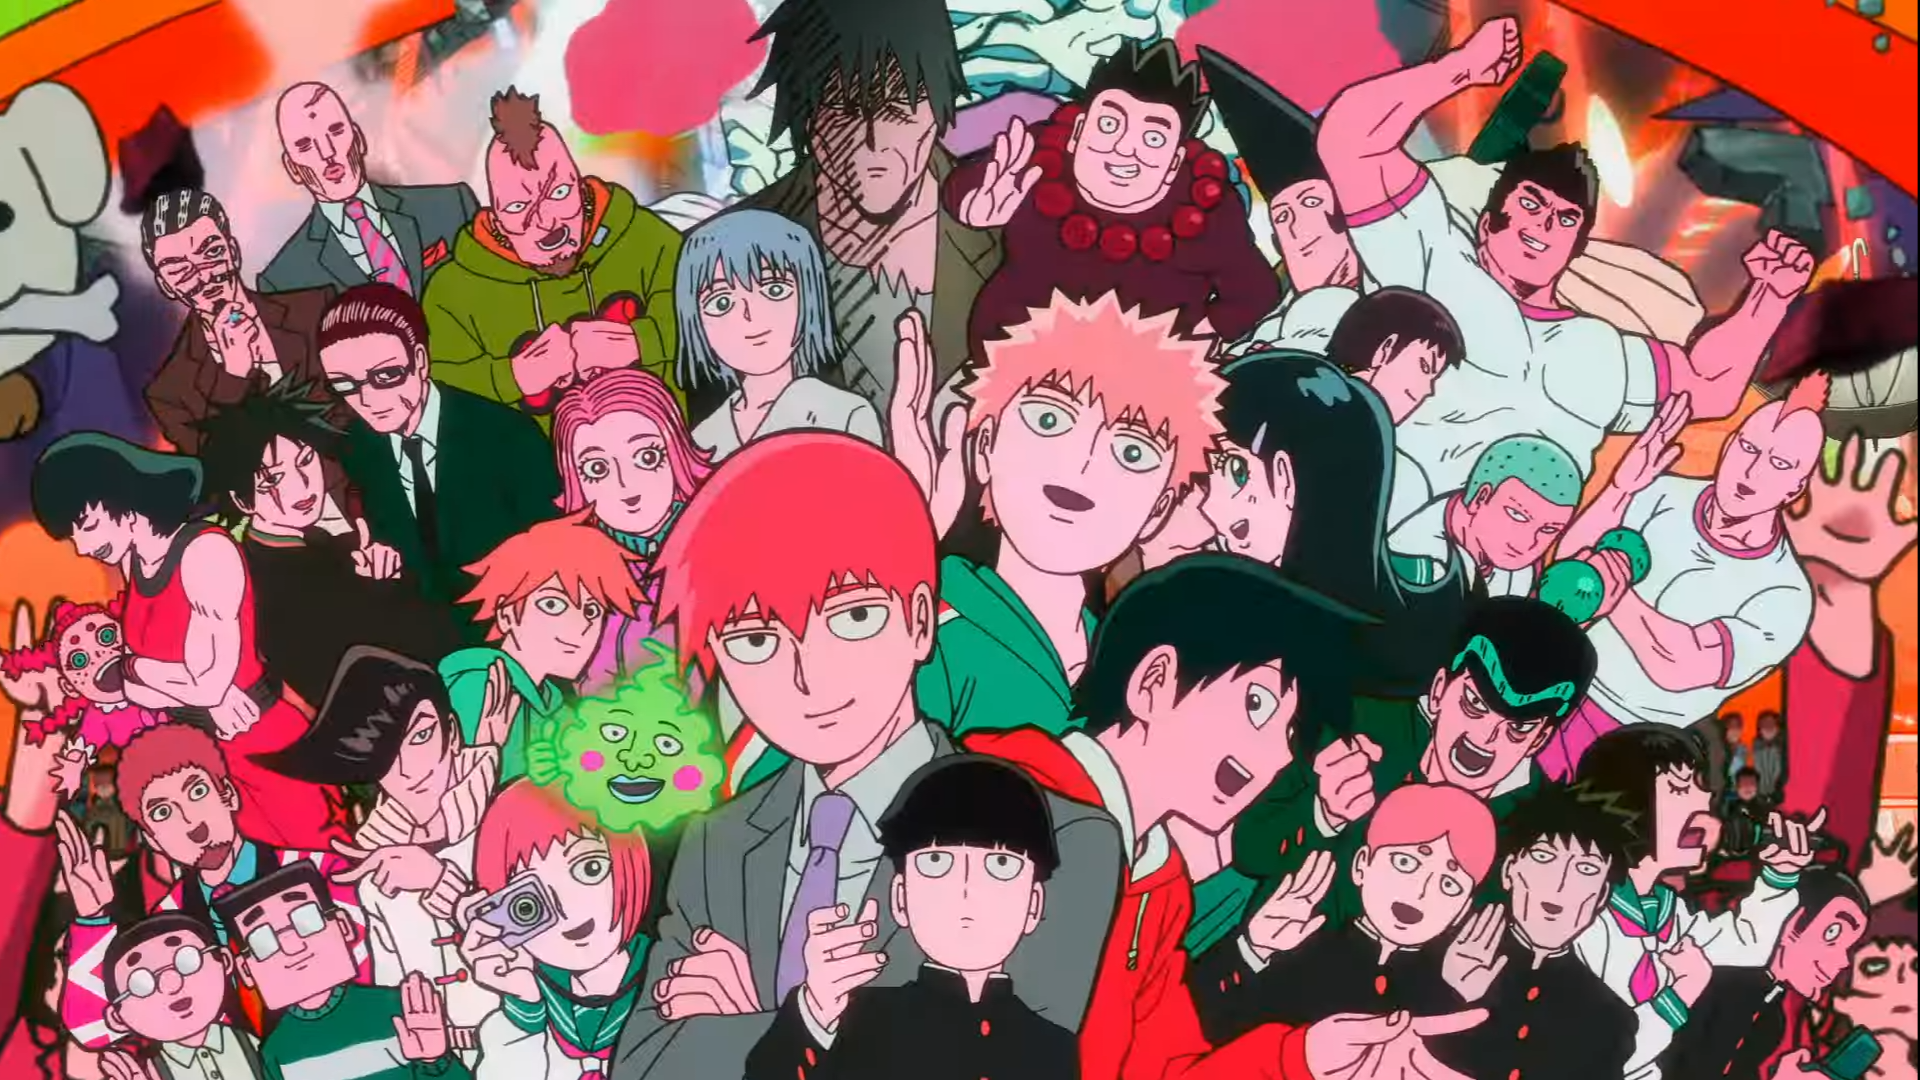 Mob Psycho 100 Season 3 Opening Revealed, October 5 Premiere Date